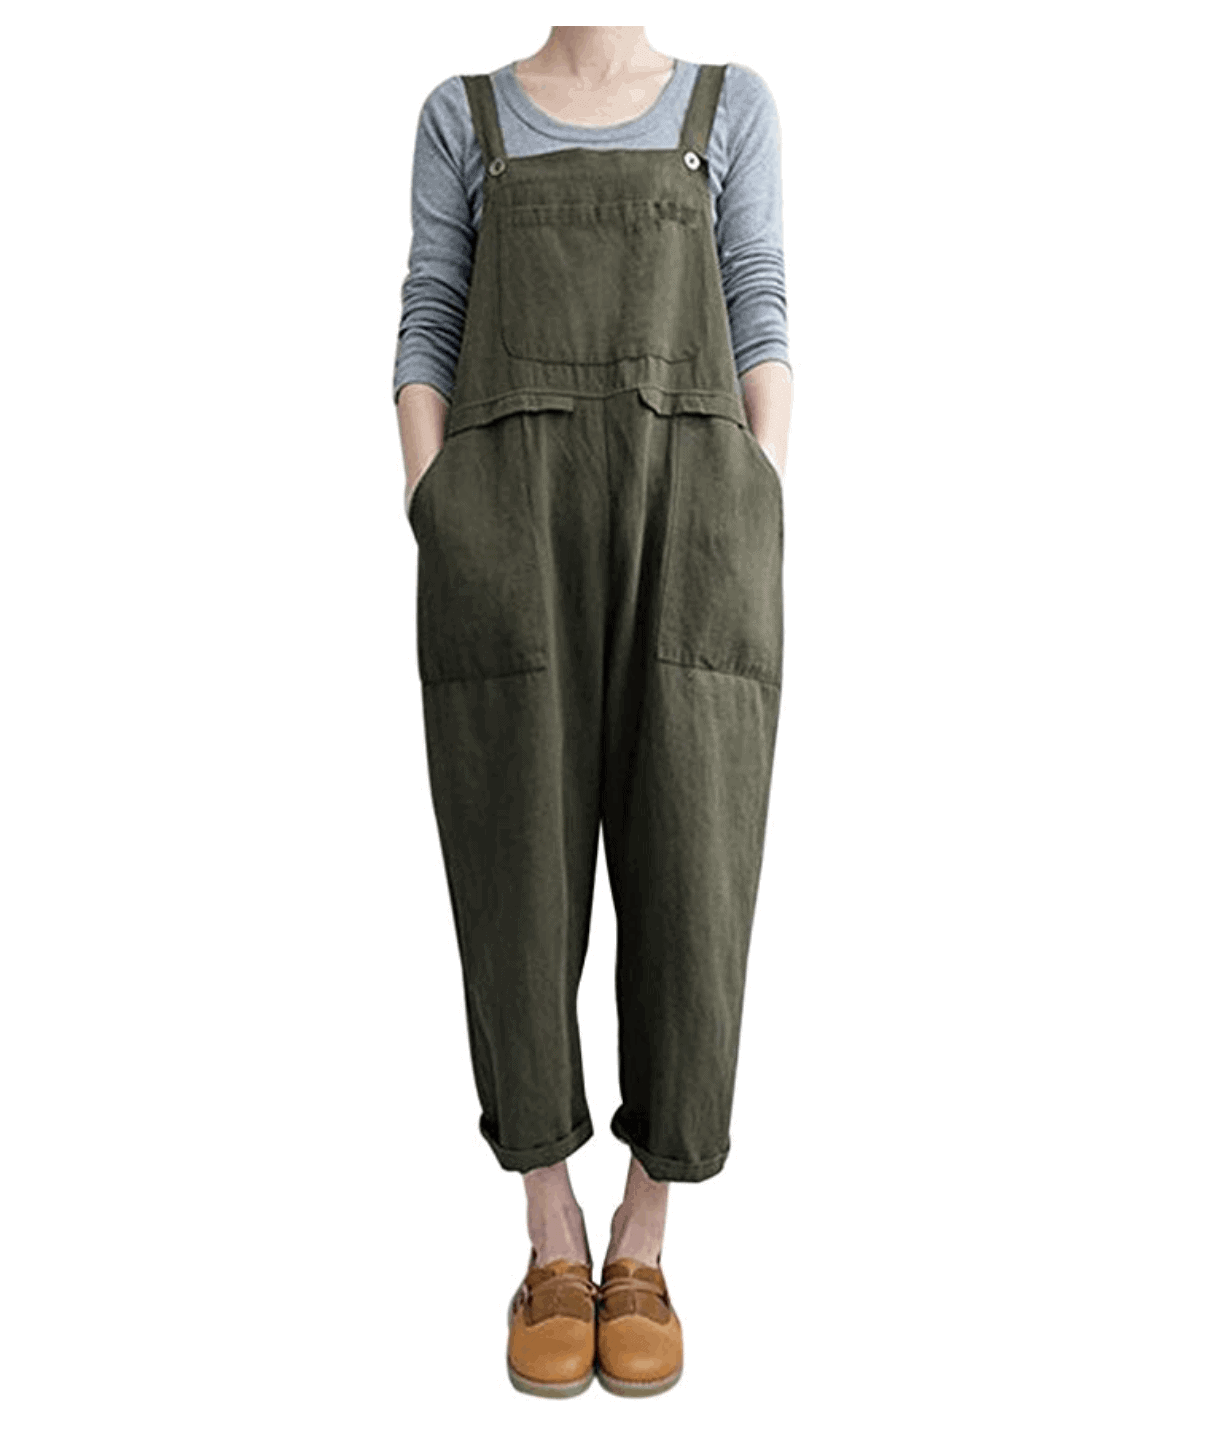 Gihuo Women's Casual Baggy Overalls Jumpsuit with Pockets - Cookies and ...